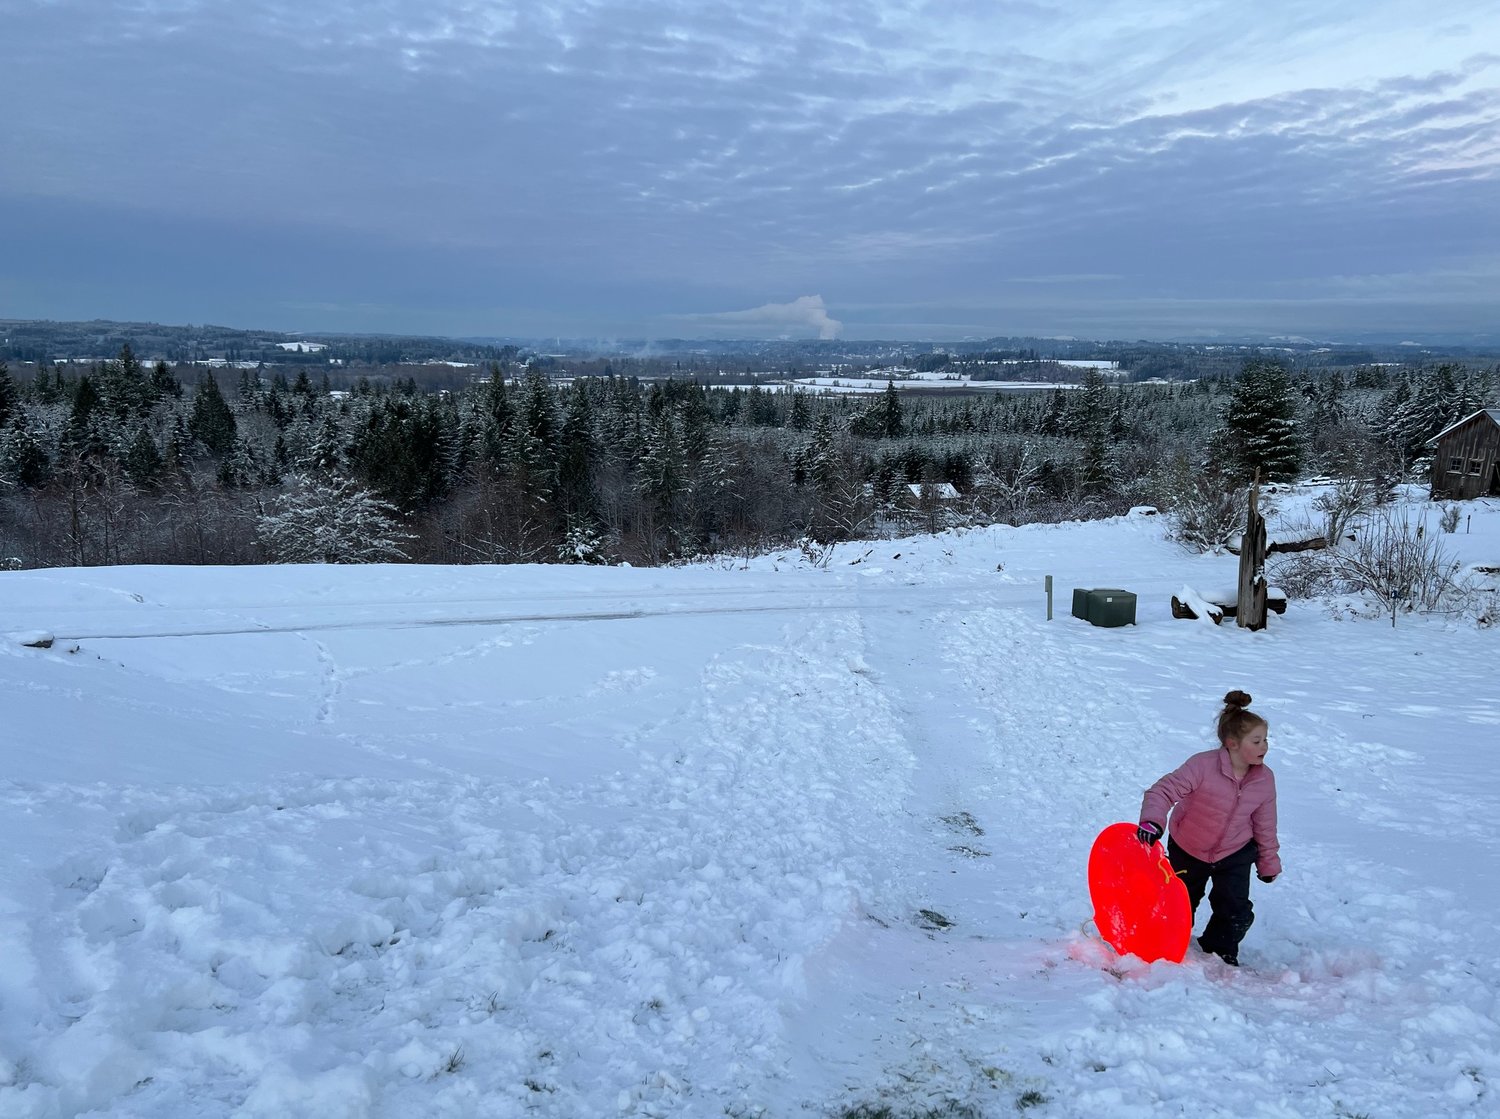 "Sledding in Adna! Charlotte has had a lot of fun playing and building a little snowman, and sledding with her parents." — submitted by Jessie Garman